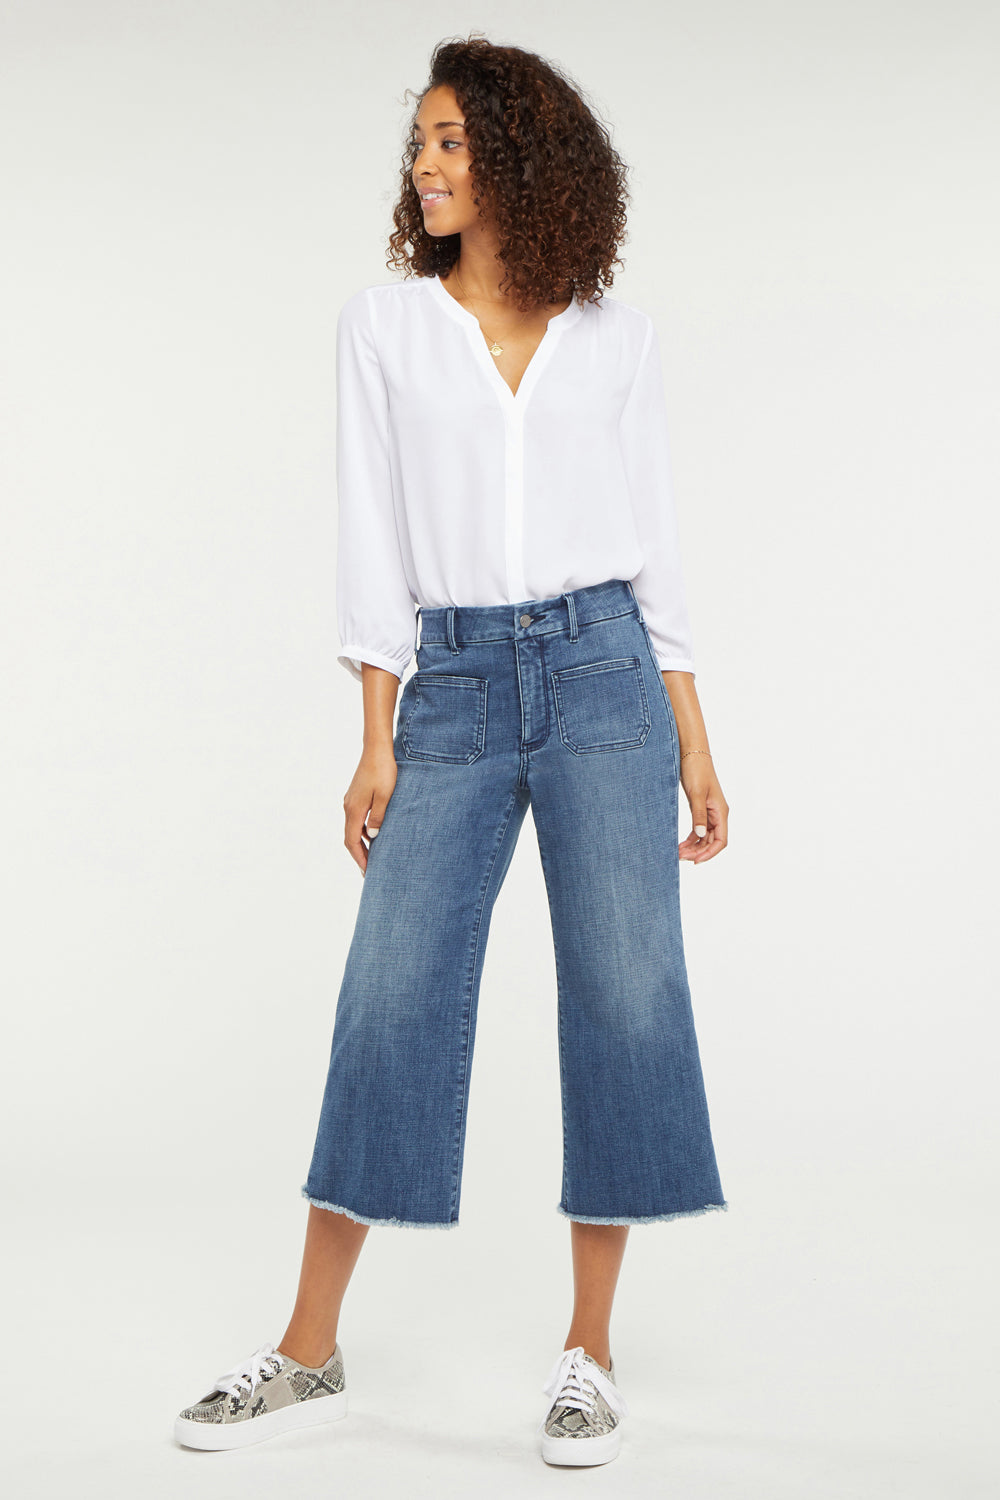 NYDJ Patchie Wide Leg Capri Jeans With Frayed Hems - Caliente